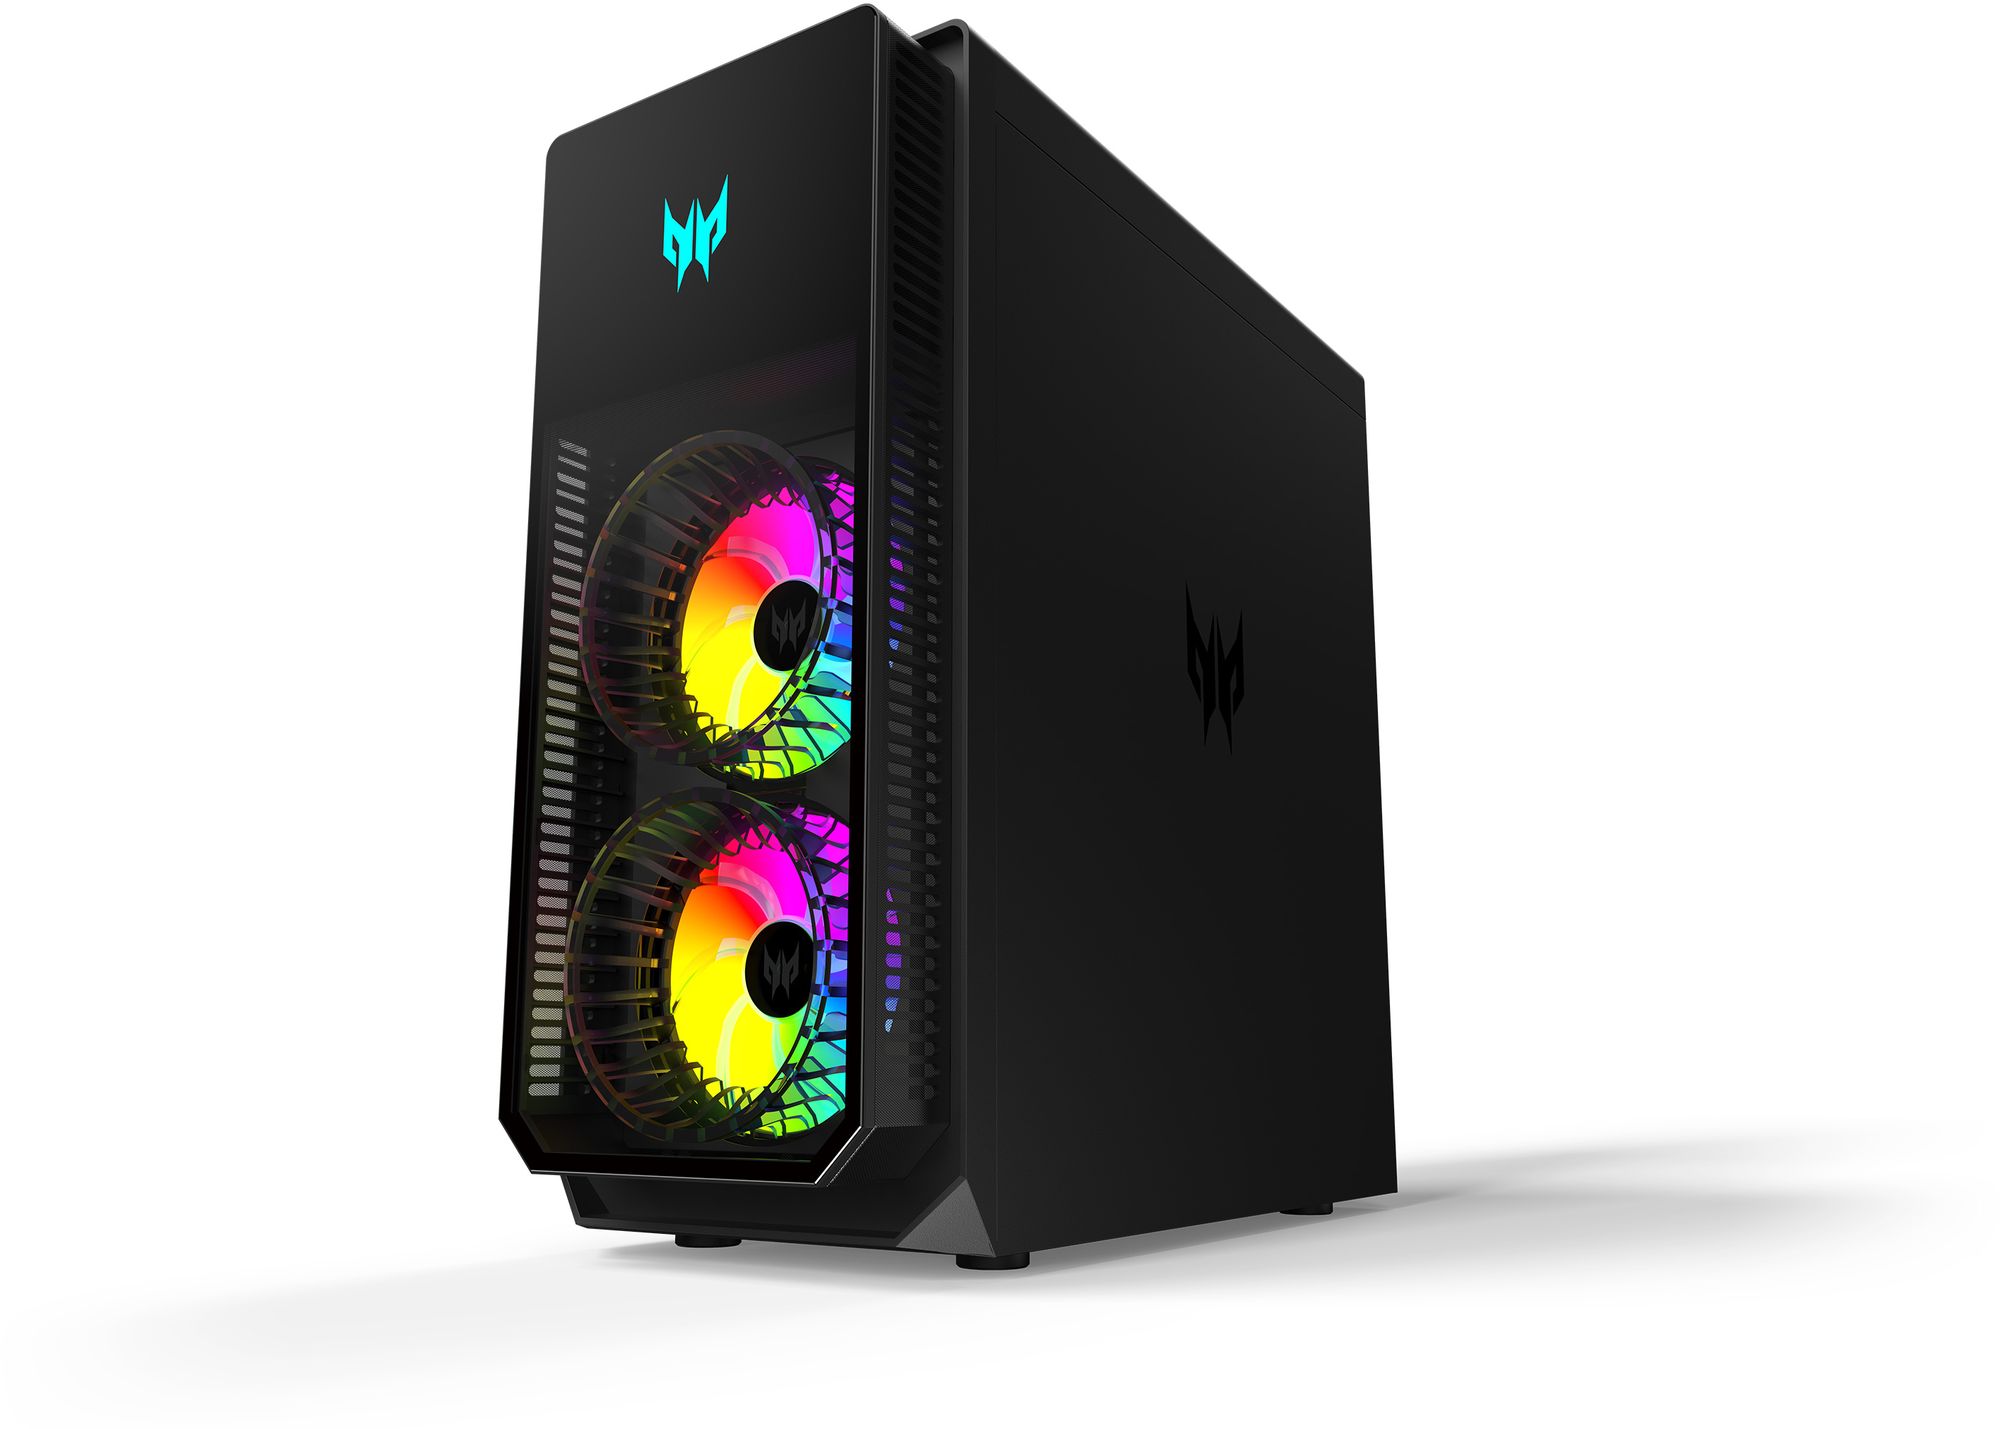 Acer announces Predator Orion 7000 gaming PC with Intel 12th Gen